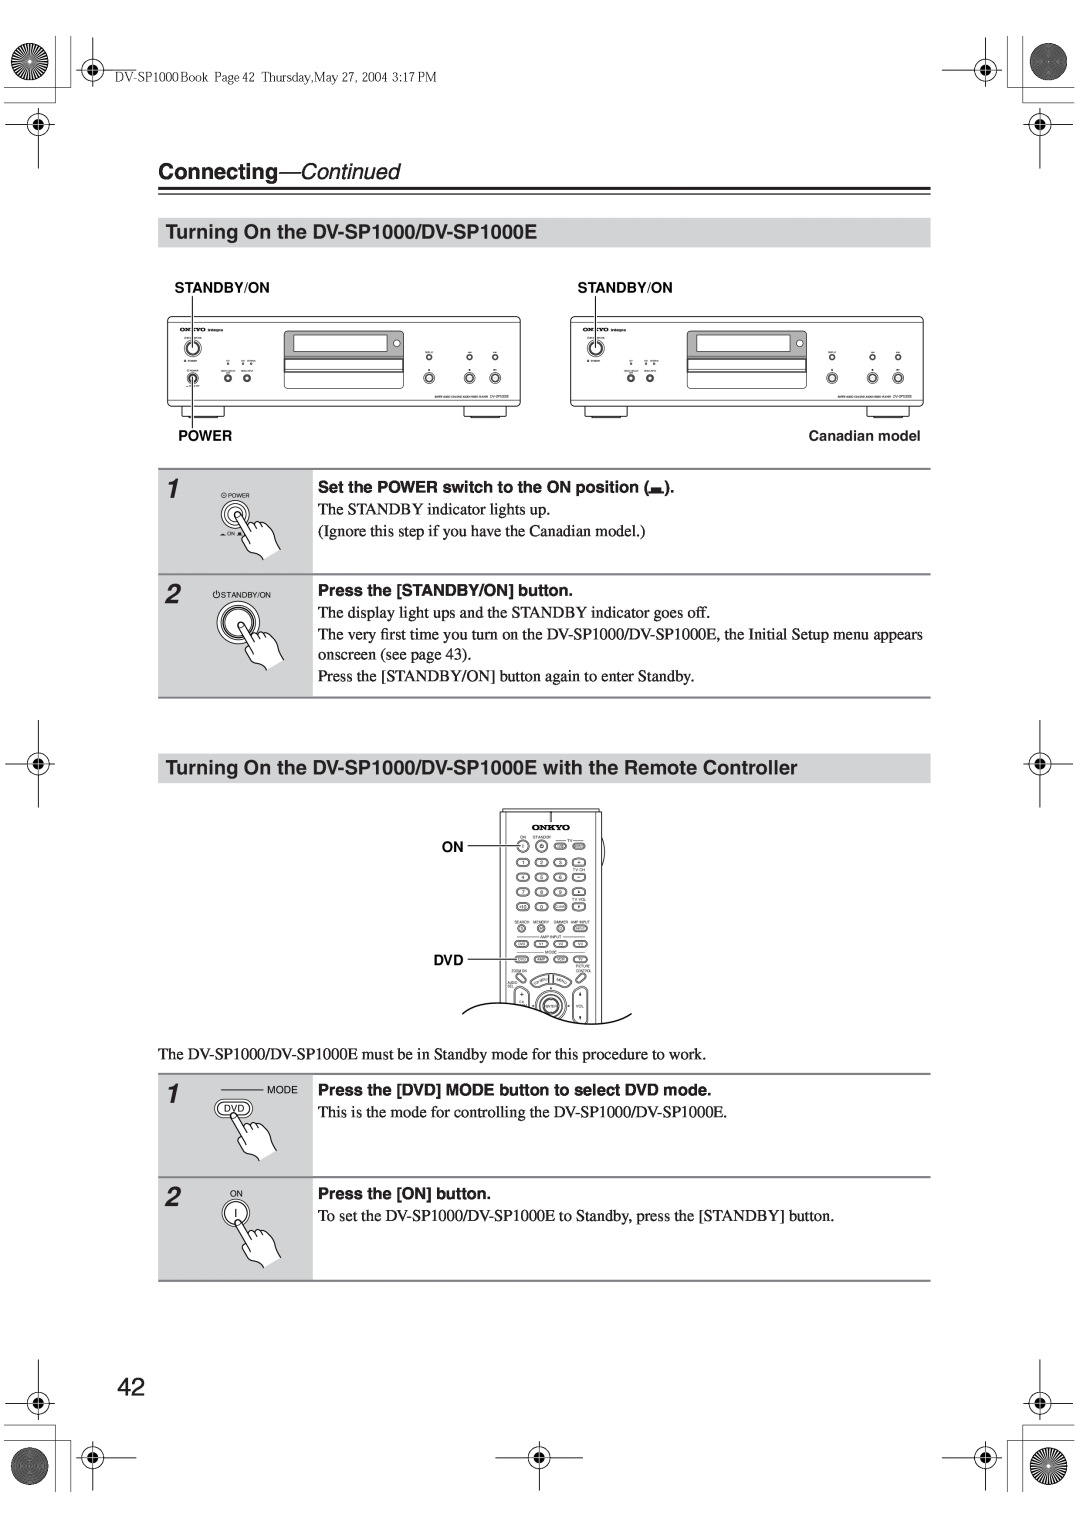 Onkyo instruction manual 2 ON, Turning On the DV-SP1000/DV-SP1000E, Connecting—Continued 